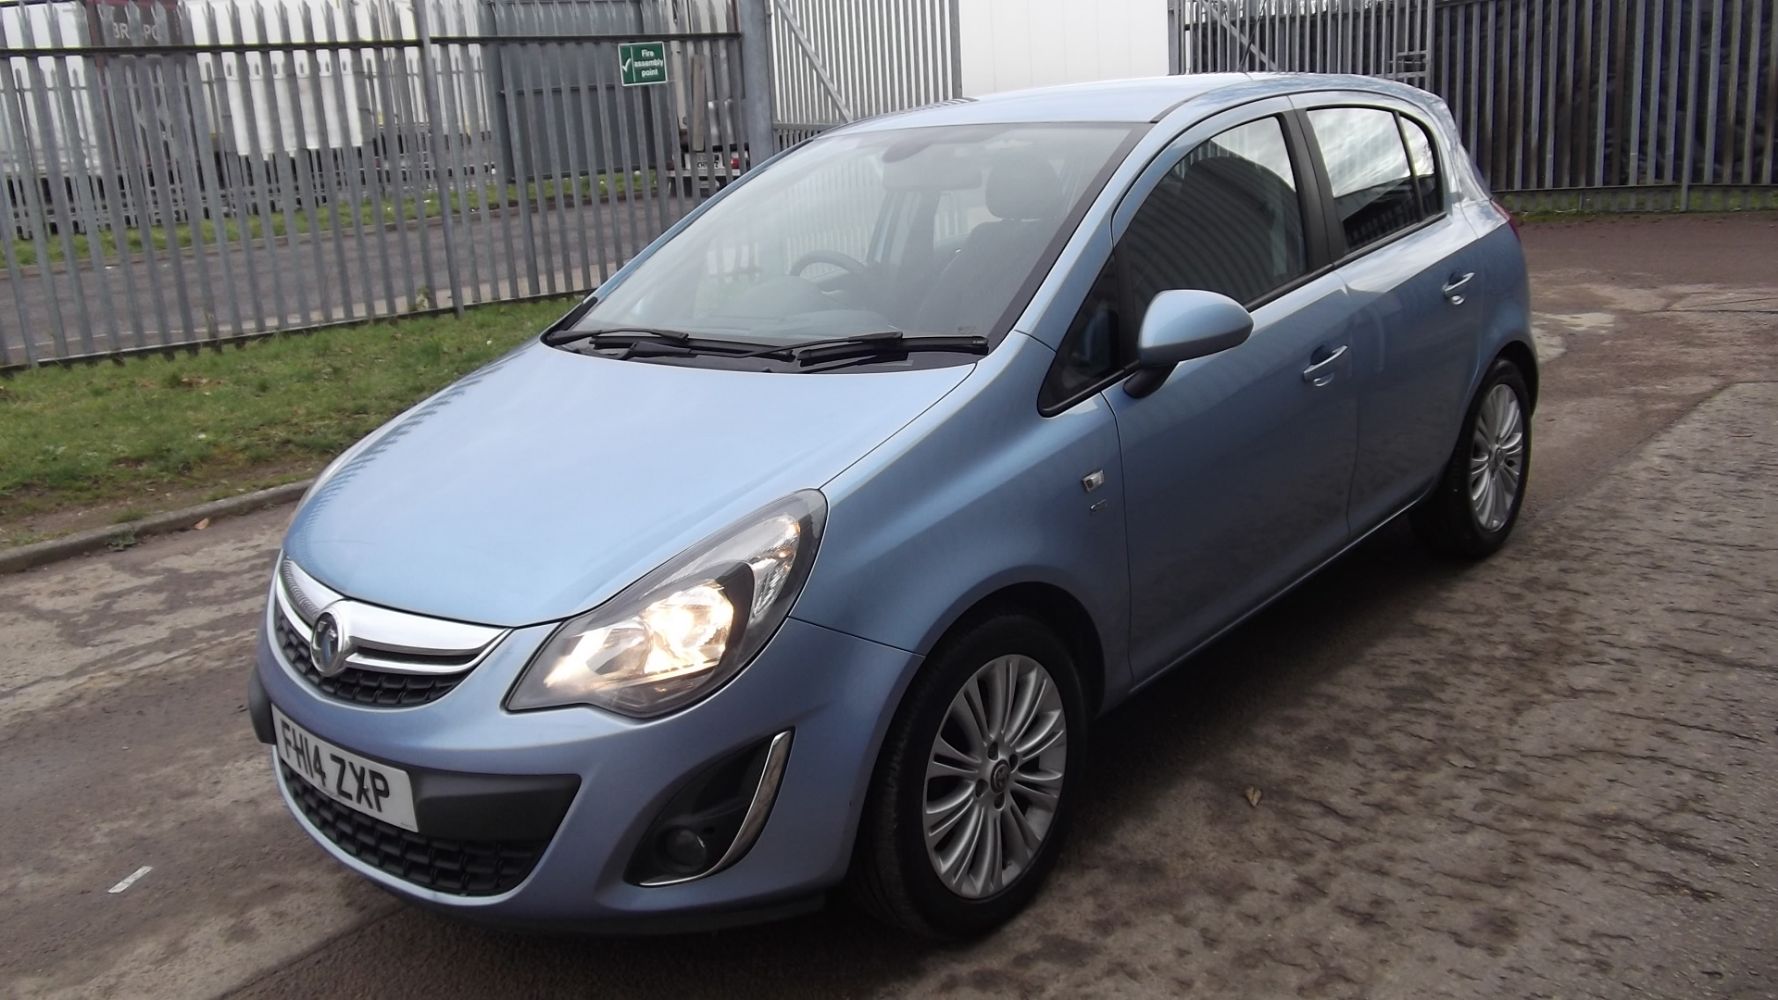 Vehicle Auction Featuring Cars, Caravan and Vans - Monday 1st February 2021